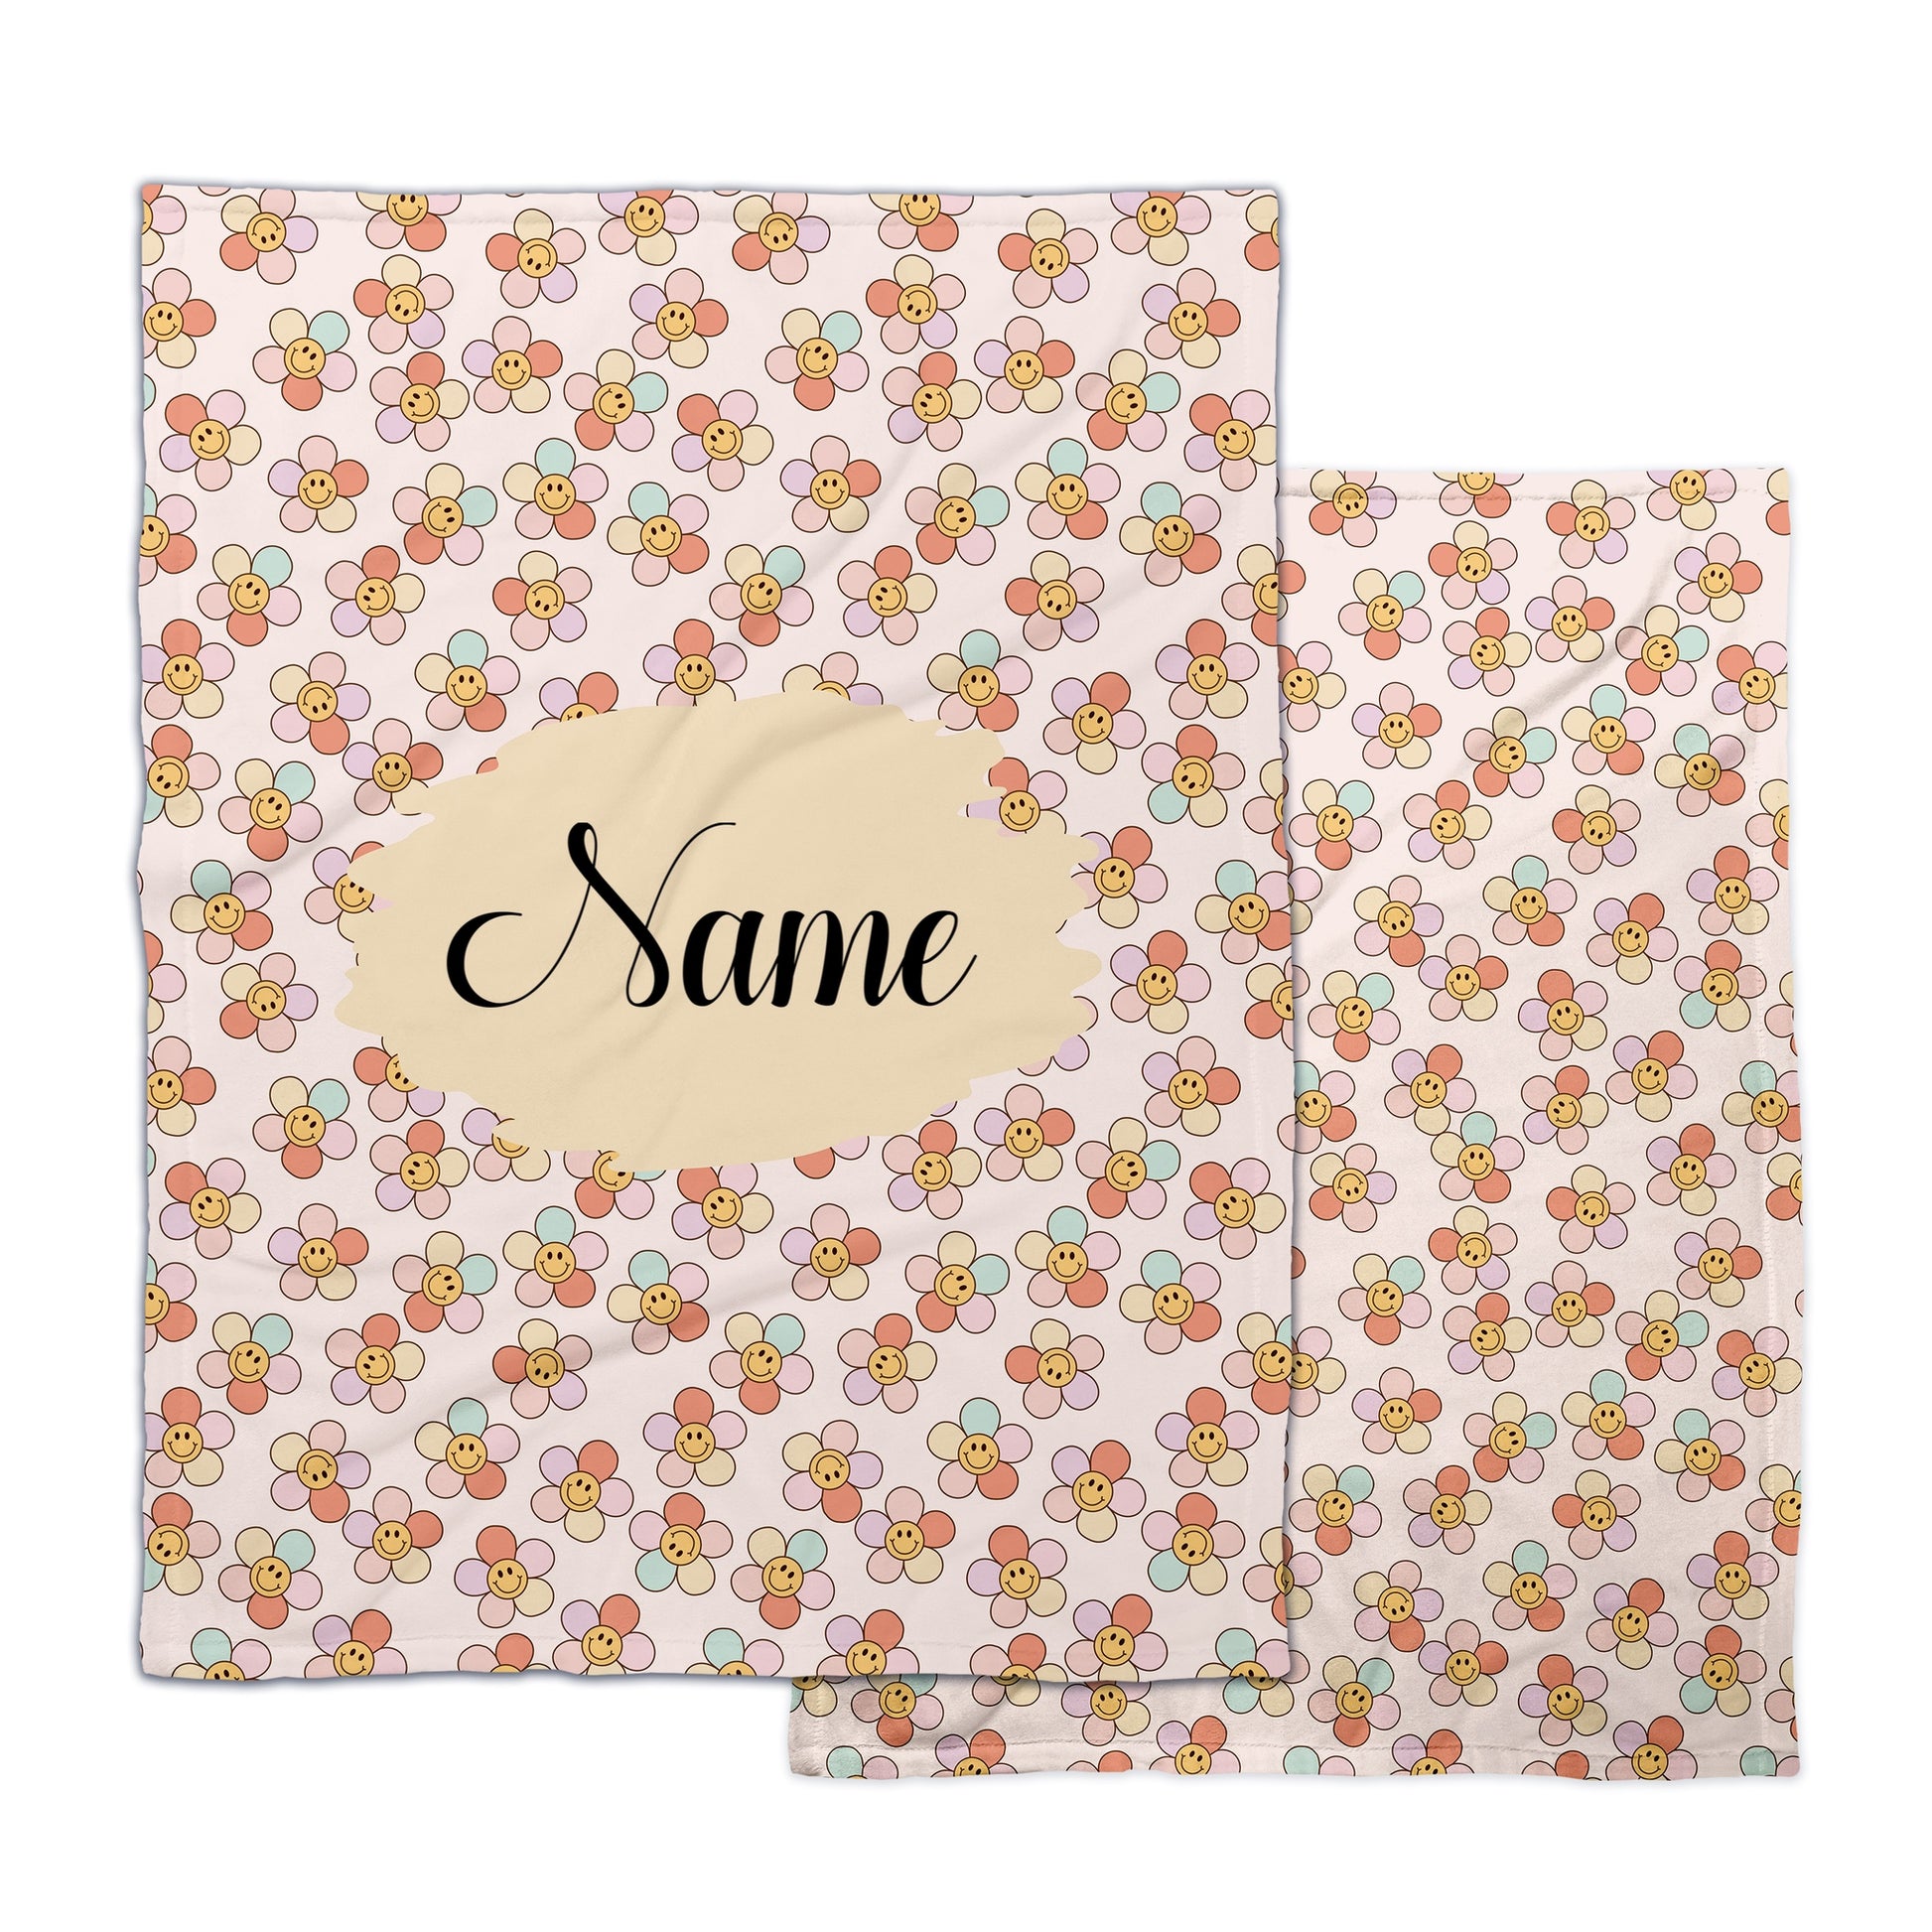 Personalized Minky Blankets - Happy Face Smiley Daisy on Light Pink  